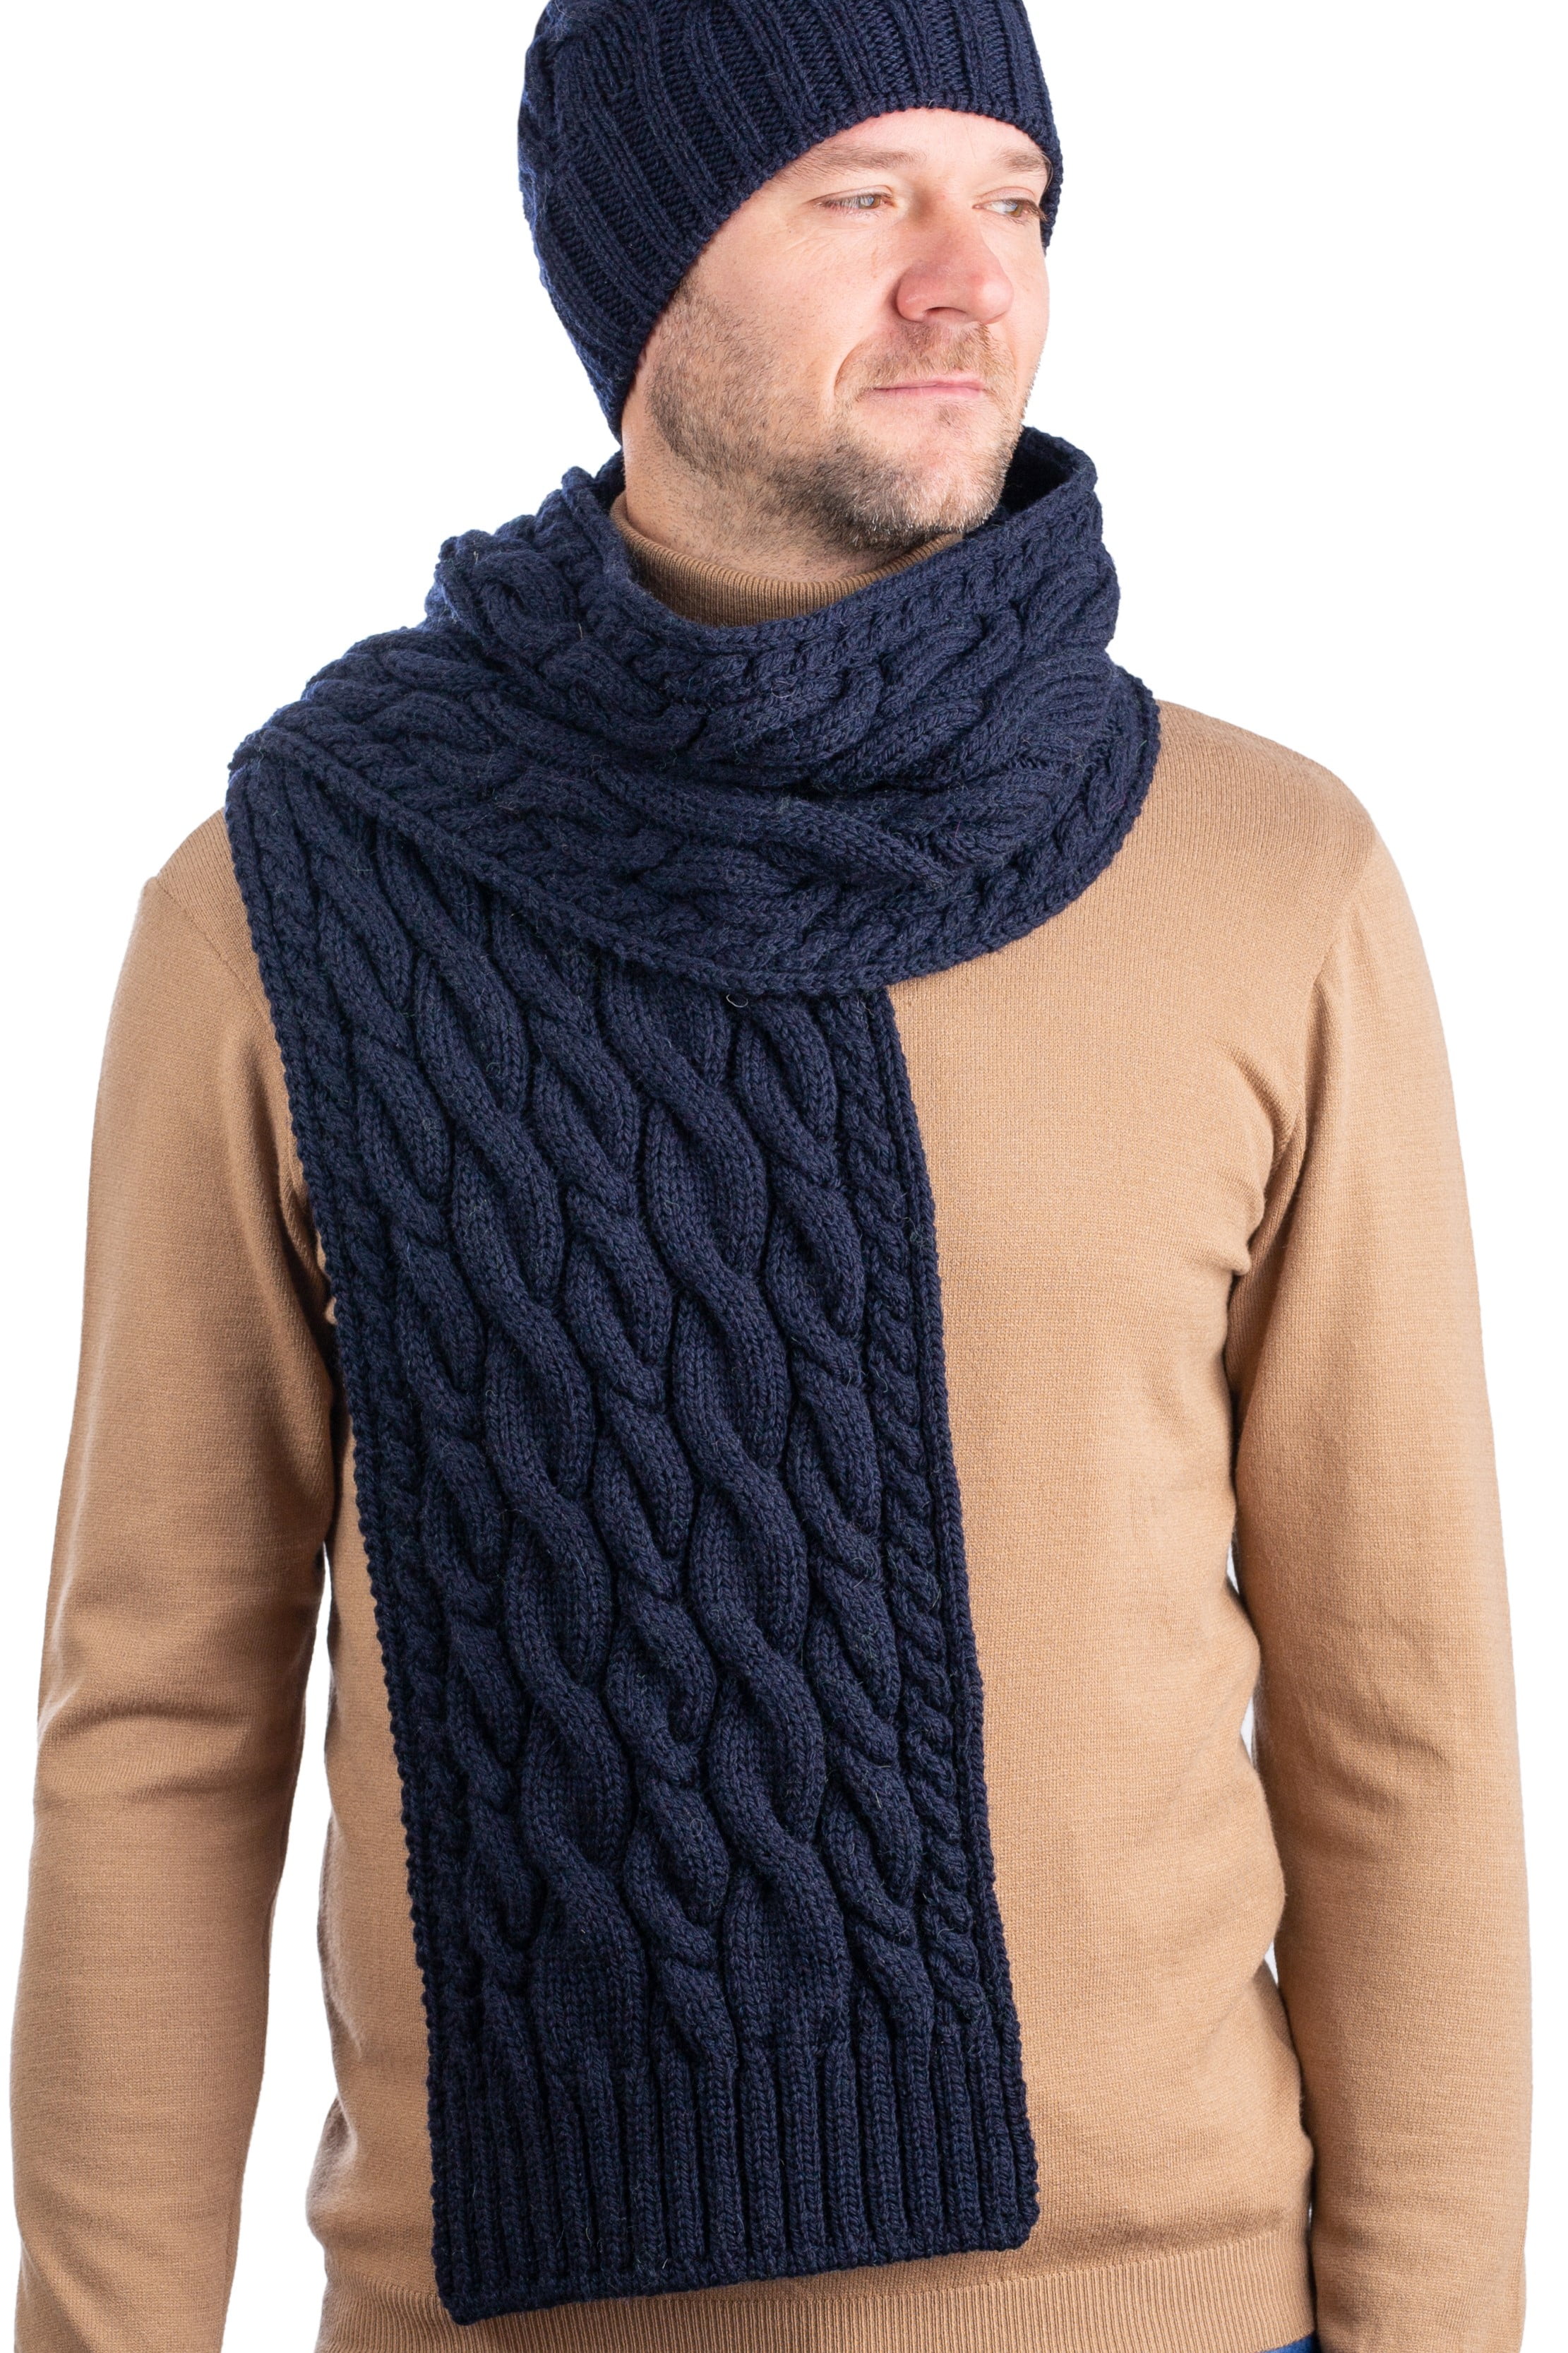 SAOL Men Merino Wool Cable Knit Cold Weather Scarf Navy